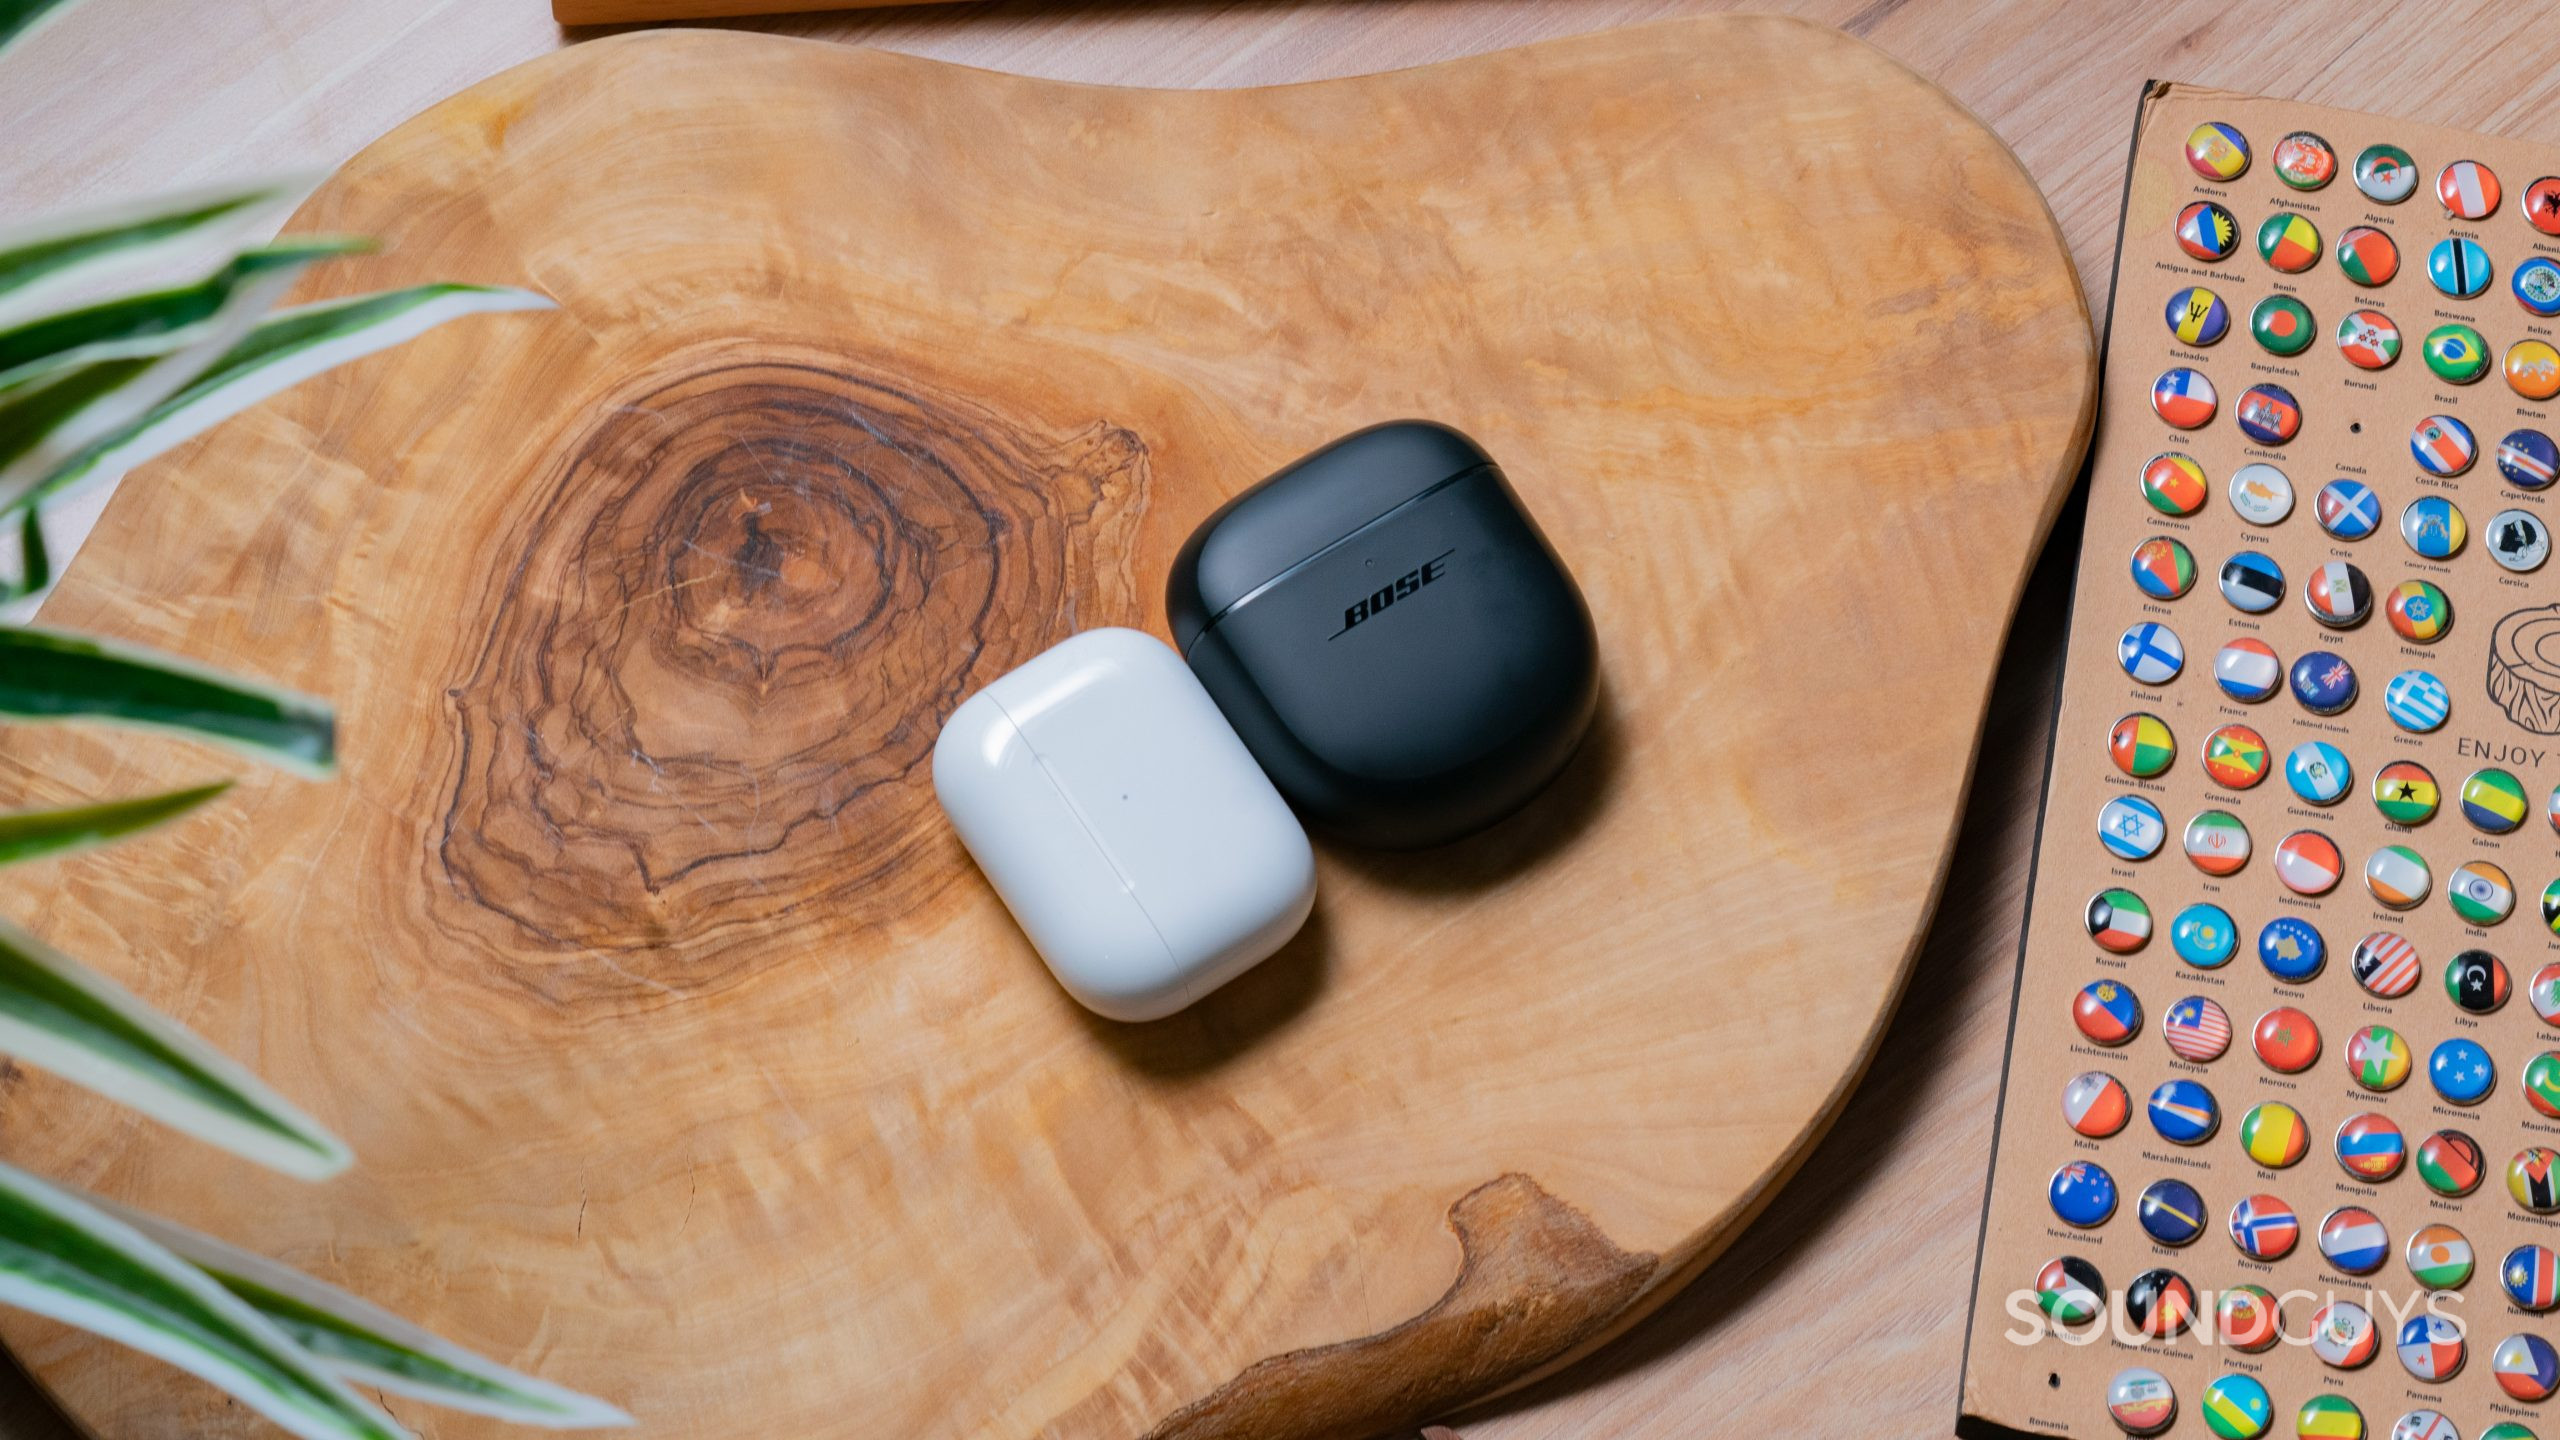 The AirPods Pro (2nd generation) and Bose QuietComfort Earbuds II cases beside each other on a wooden slab.